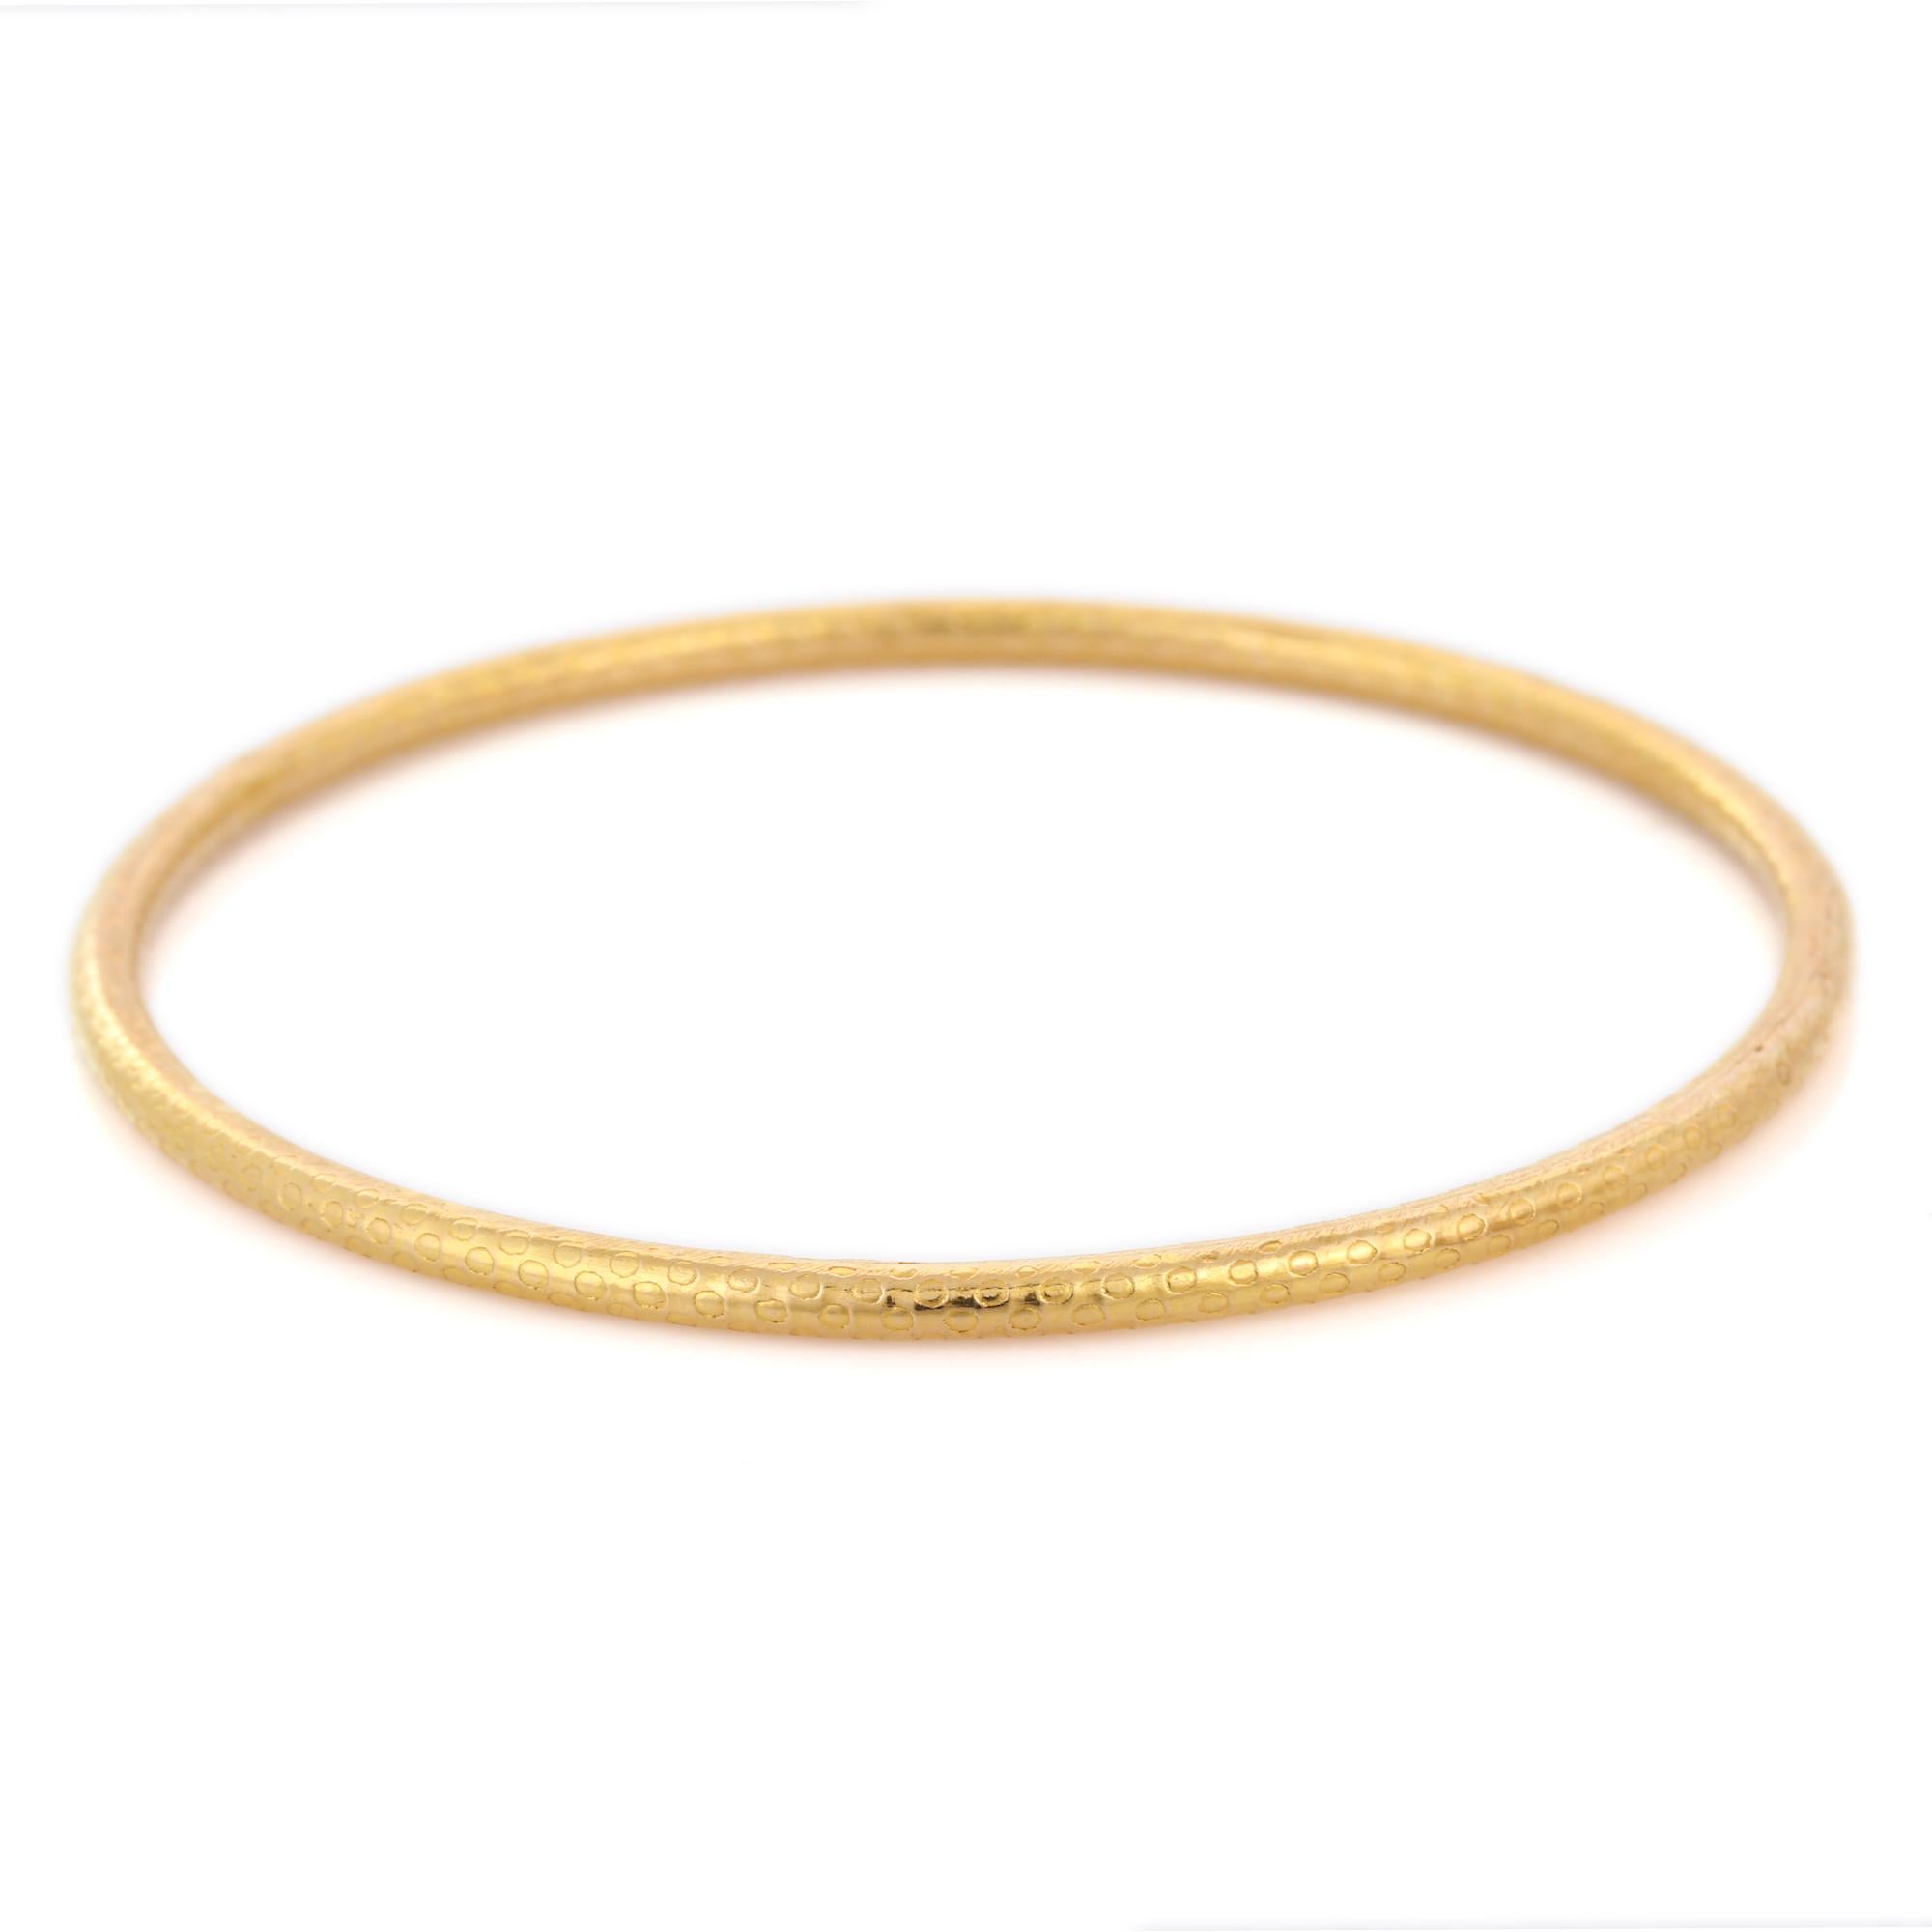 Yellow Engraved Bangle in 18K Gold. It’s a great jewelry ornament to wear on occasions and at the same time works as a wonderful gift for your loved ones. These lovely statement pieces are perfect generation jewelry to pass on.
Bangles feel